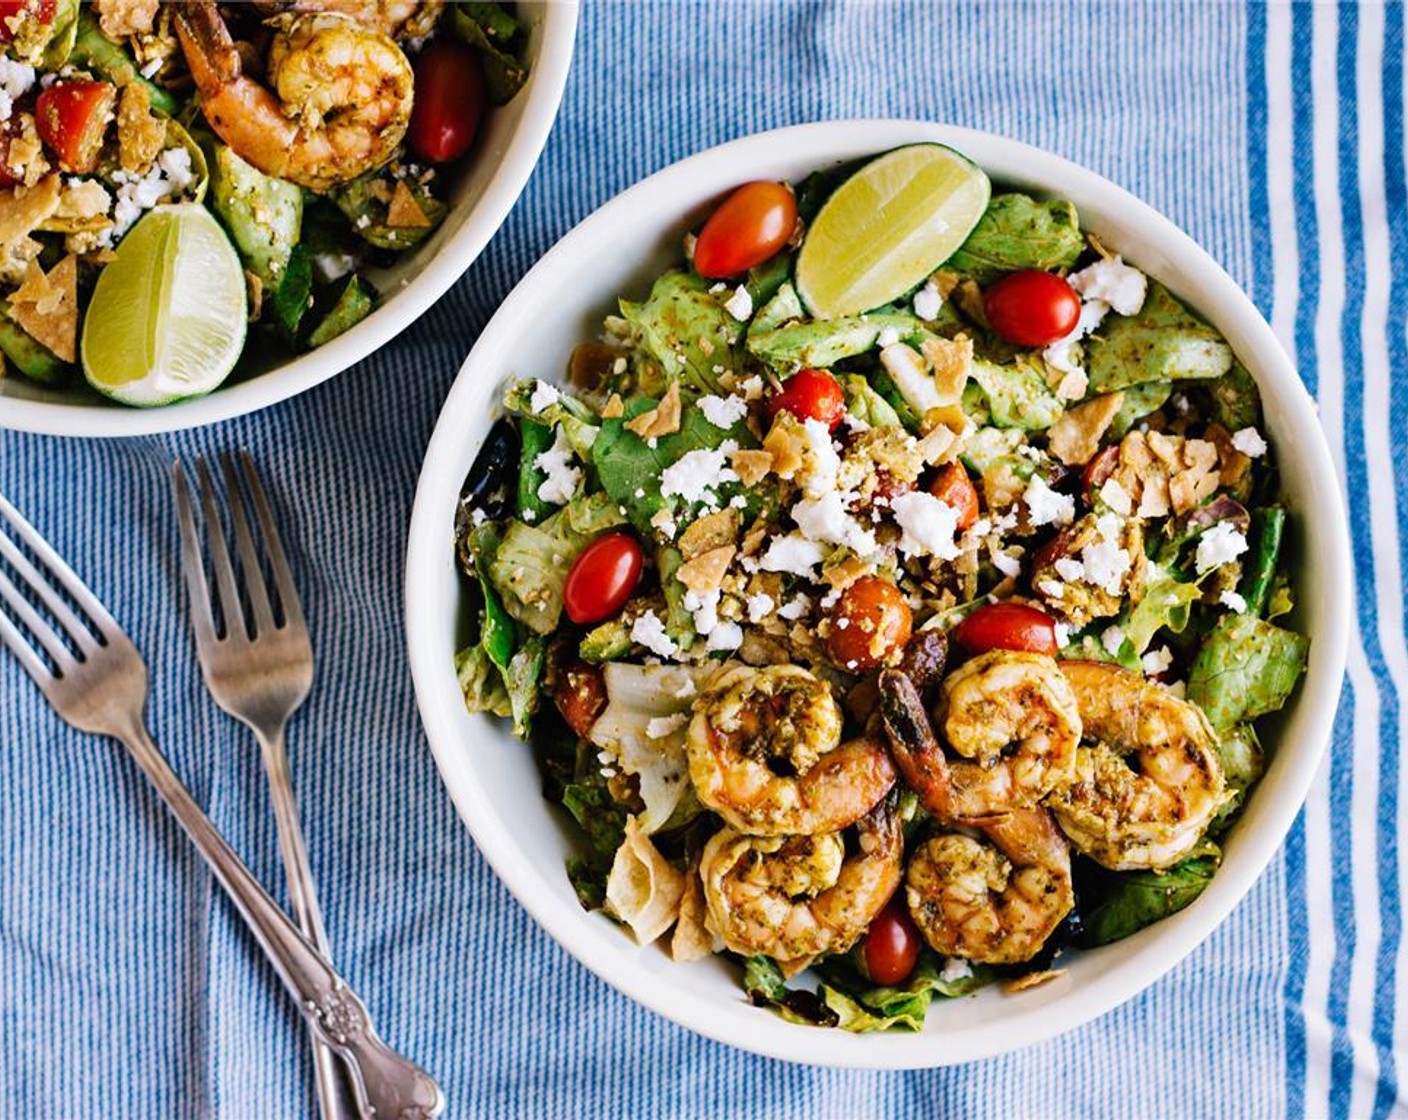 step 10 Divide the salad into bowls. Top with shrimp and serve with extra lime wedges. Serve and enjoy!